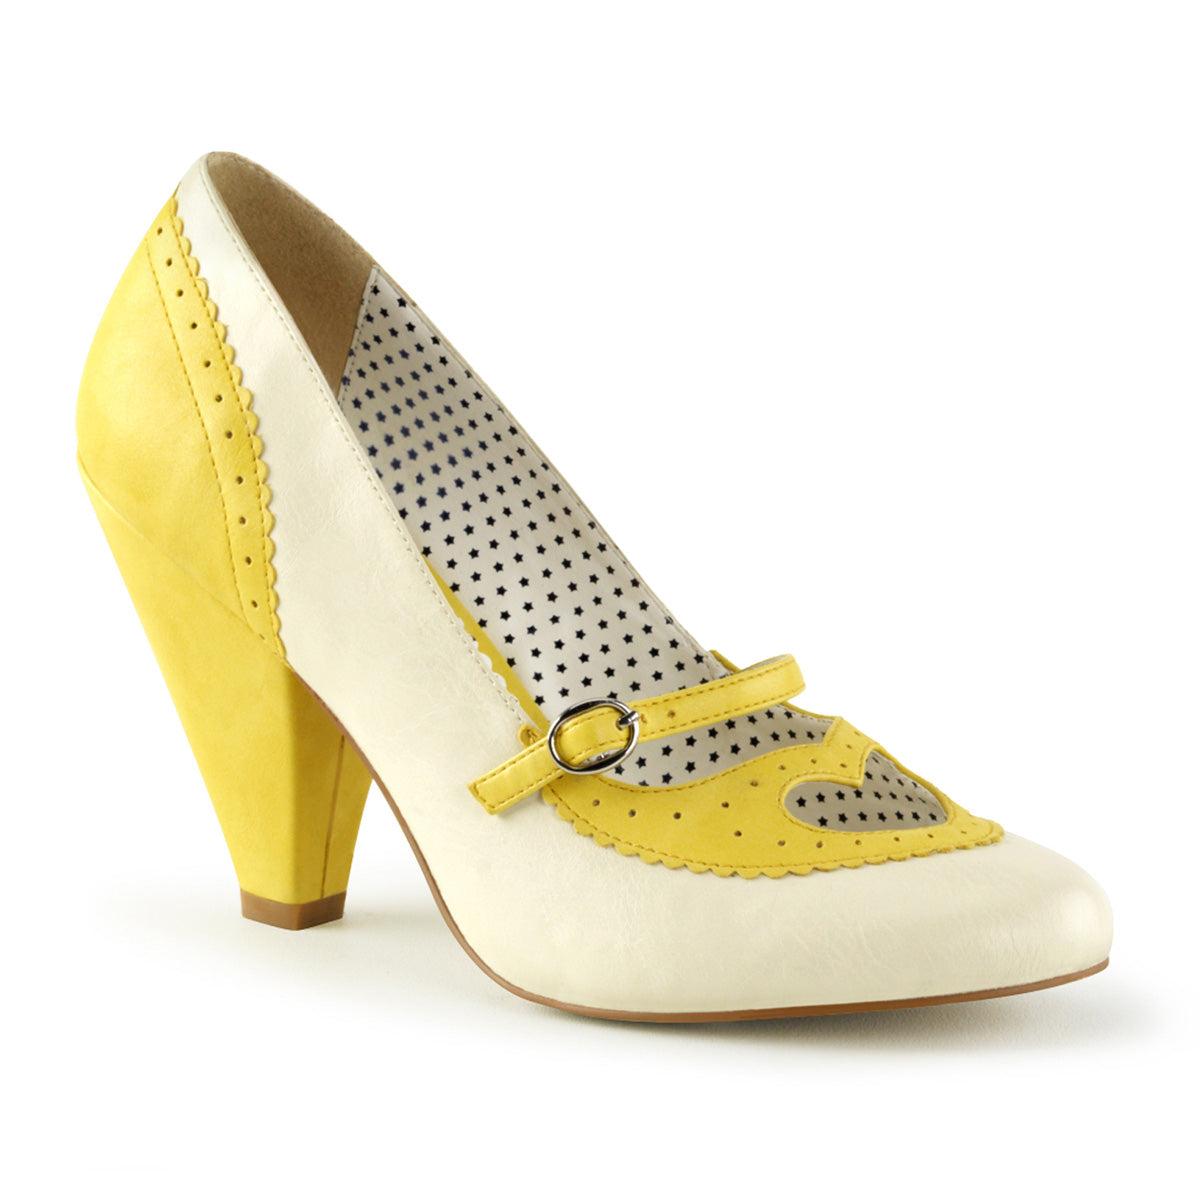 Poppy-18 Pin Up Couture Glamour 4 "Heel Yellow Fetish-schoenen